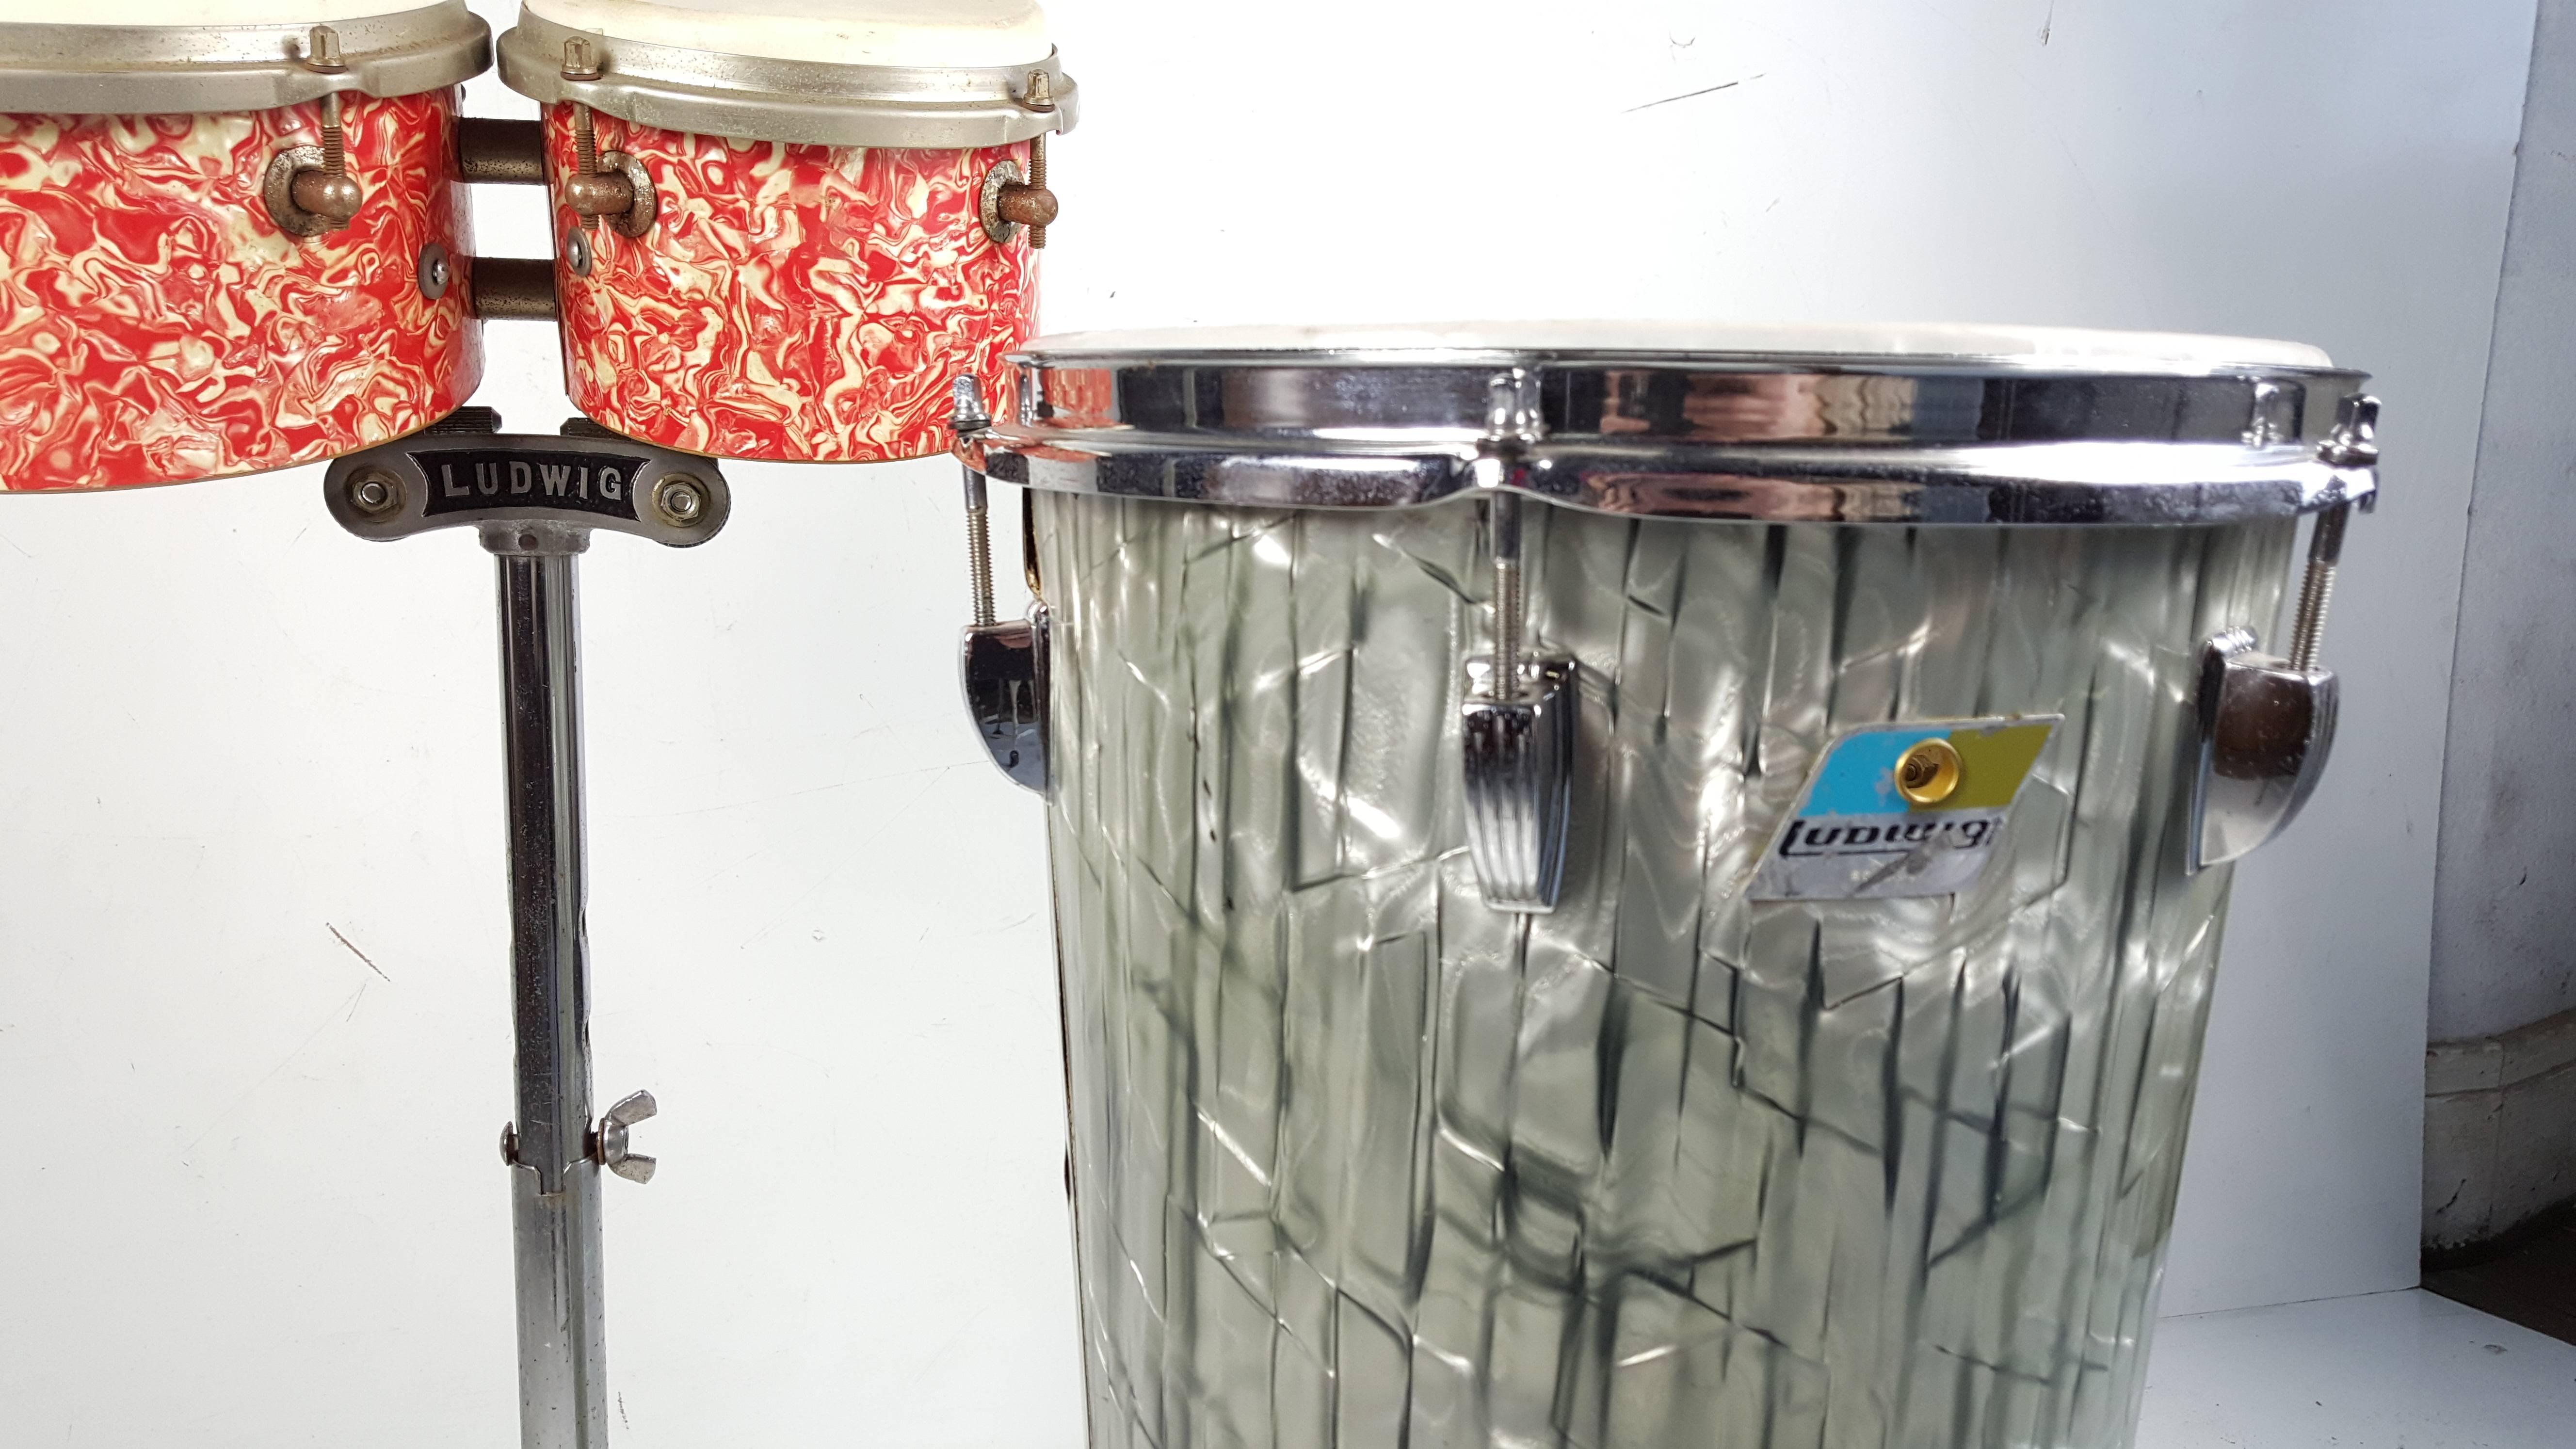 Interesting group of vintage Ludwig drums,, 1950s bongo drums,, retain original stand with early LUDWIG cast steel,period red-orange marbelized finish,, Conical modernist 1970s conga drum,,classic Beatles laminate over wood shell,,Professional drums